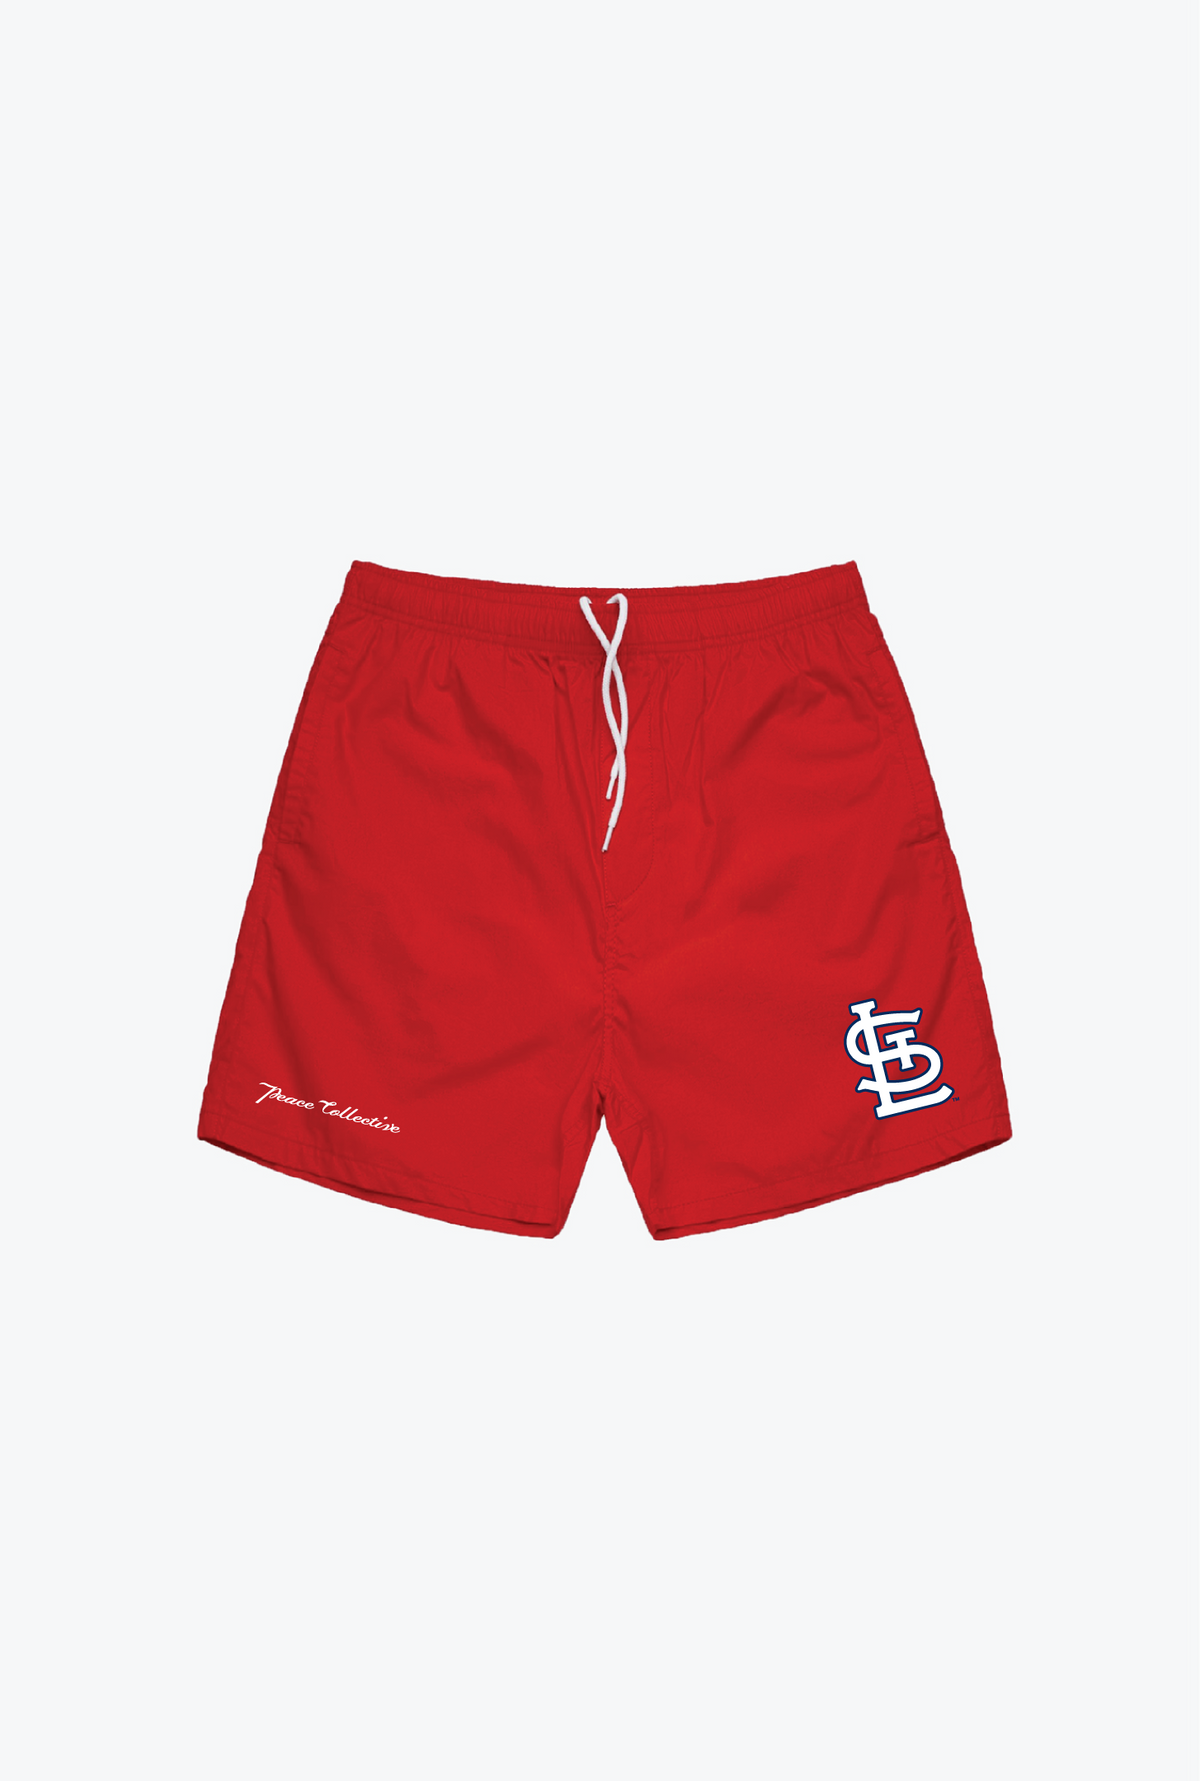 St. Louis Cardinals Board Shorts - Red